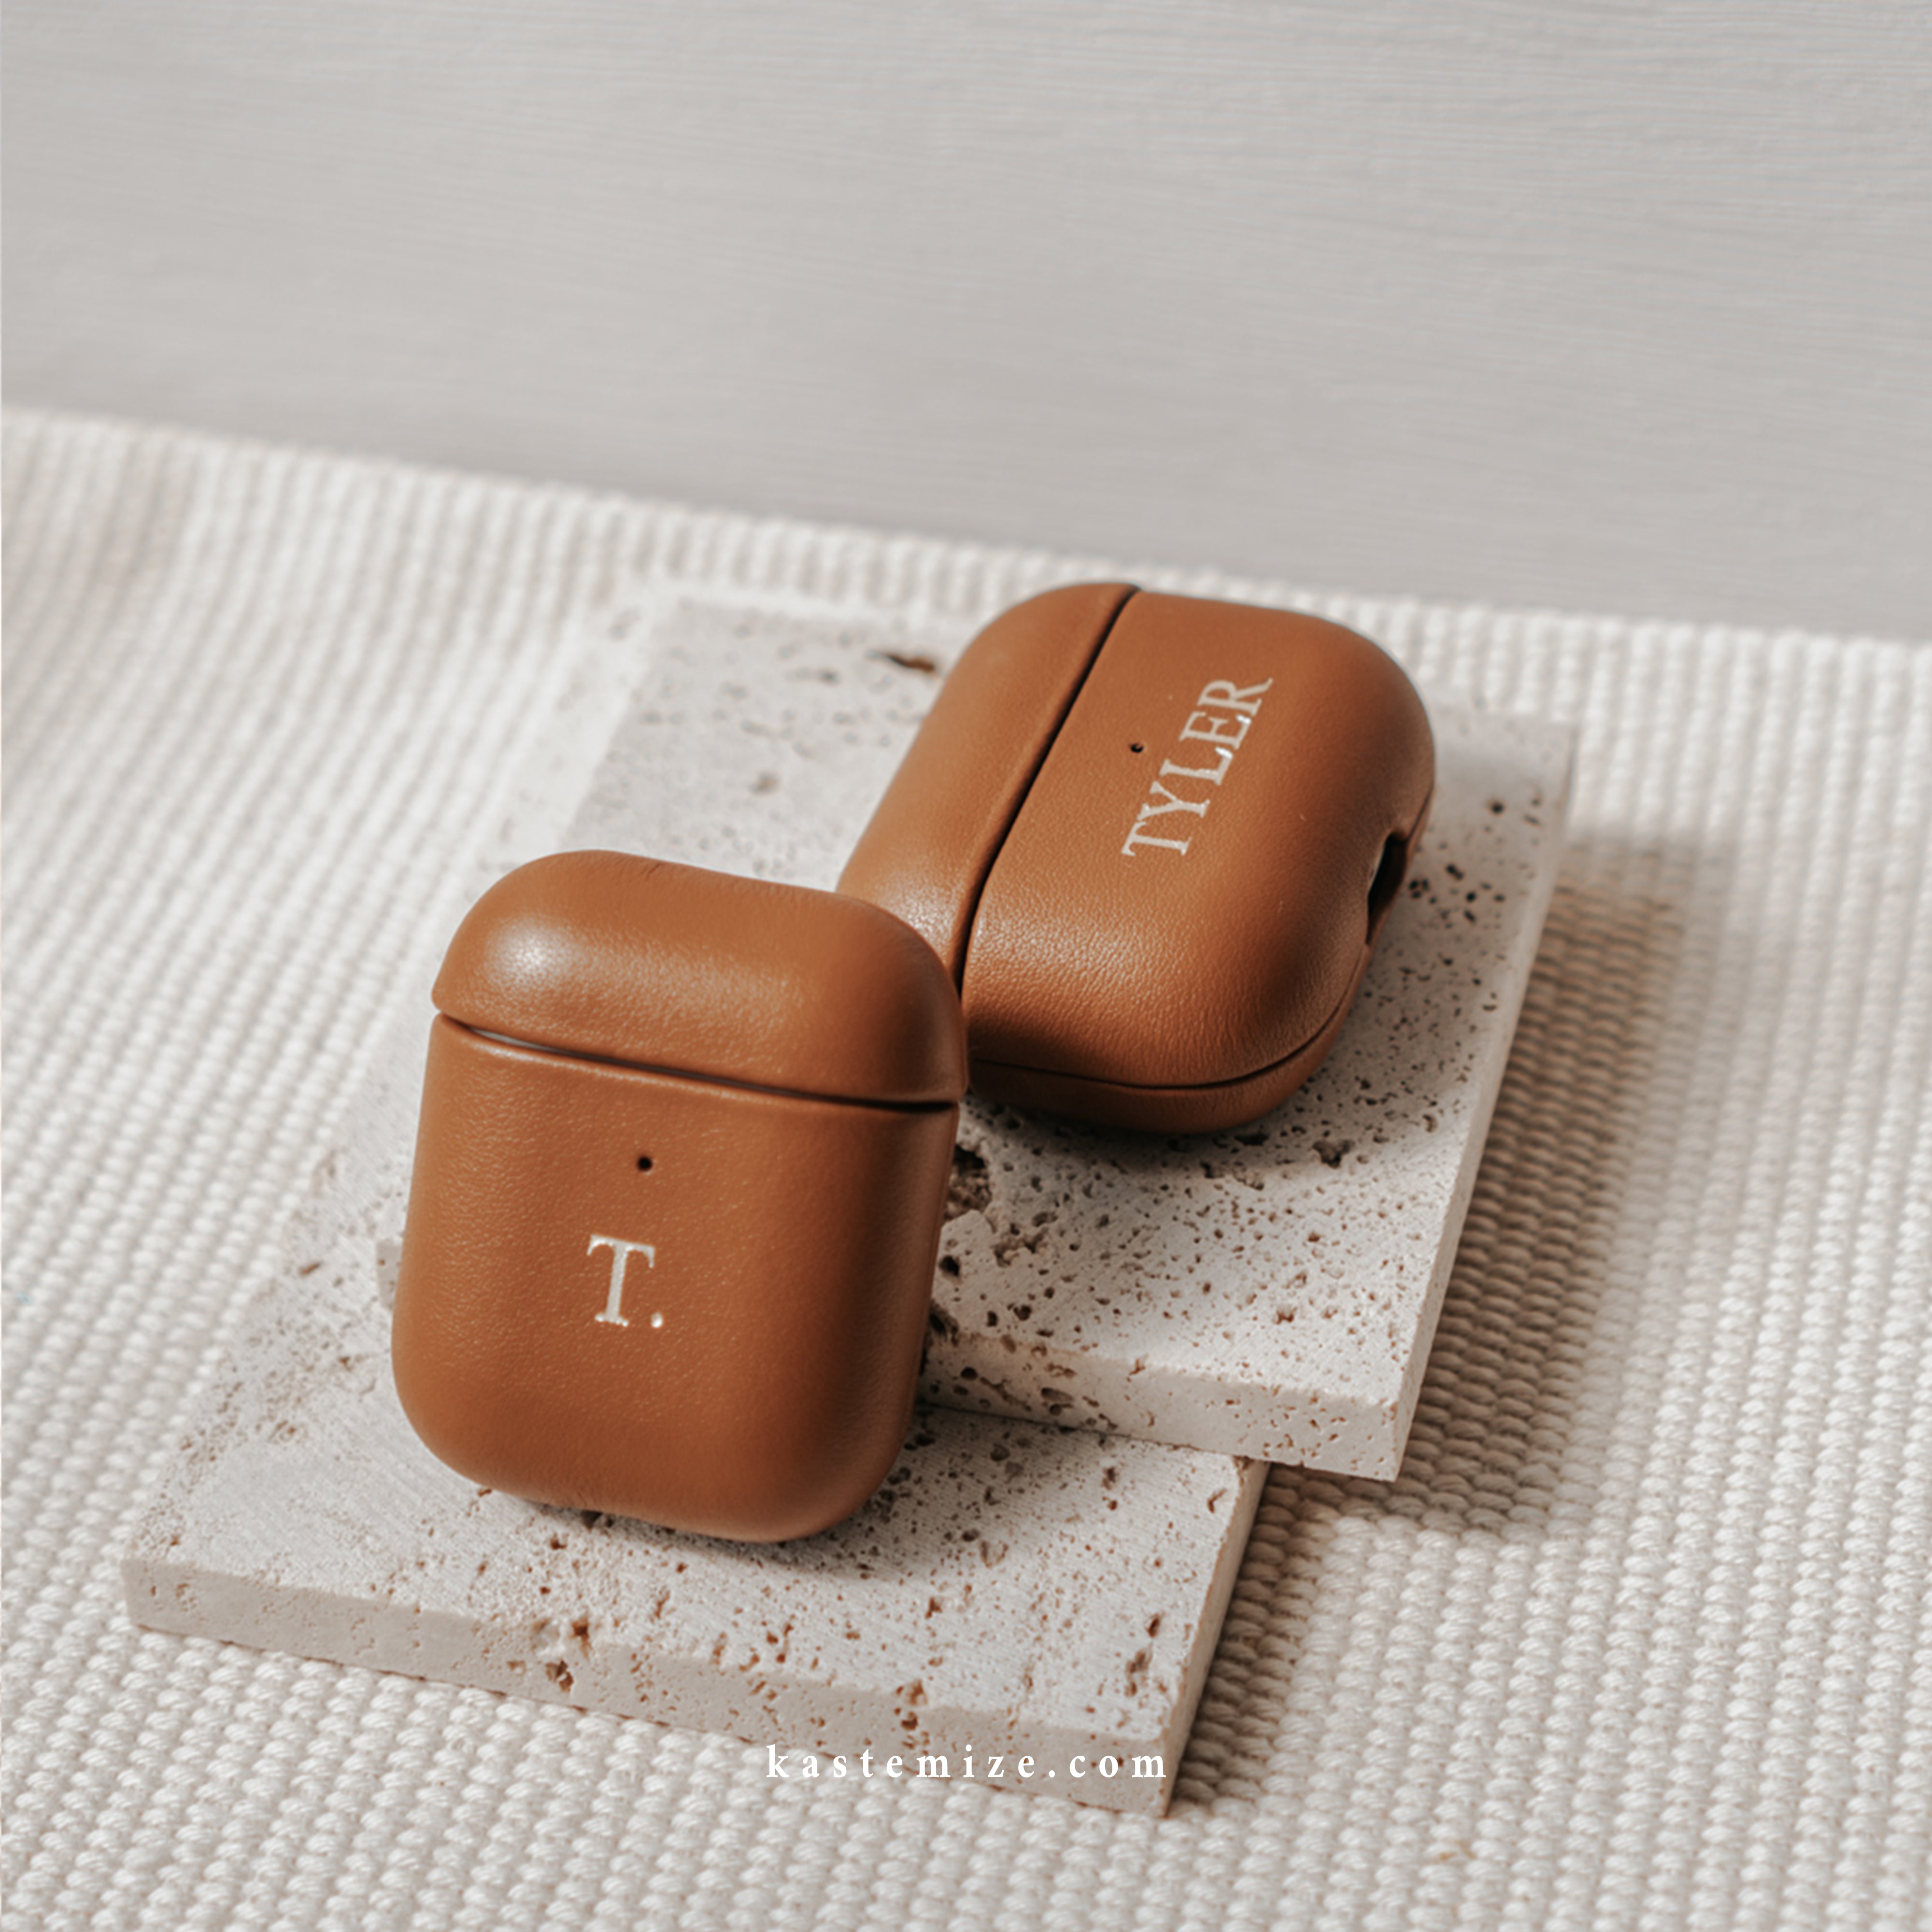 Personalised Brown Airpods Case in Singapore with name engraving and customisation